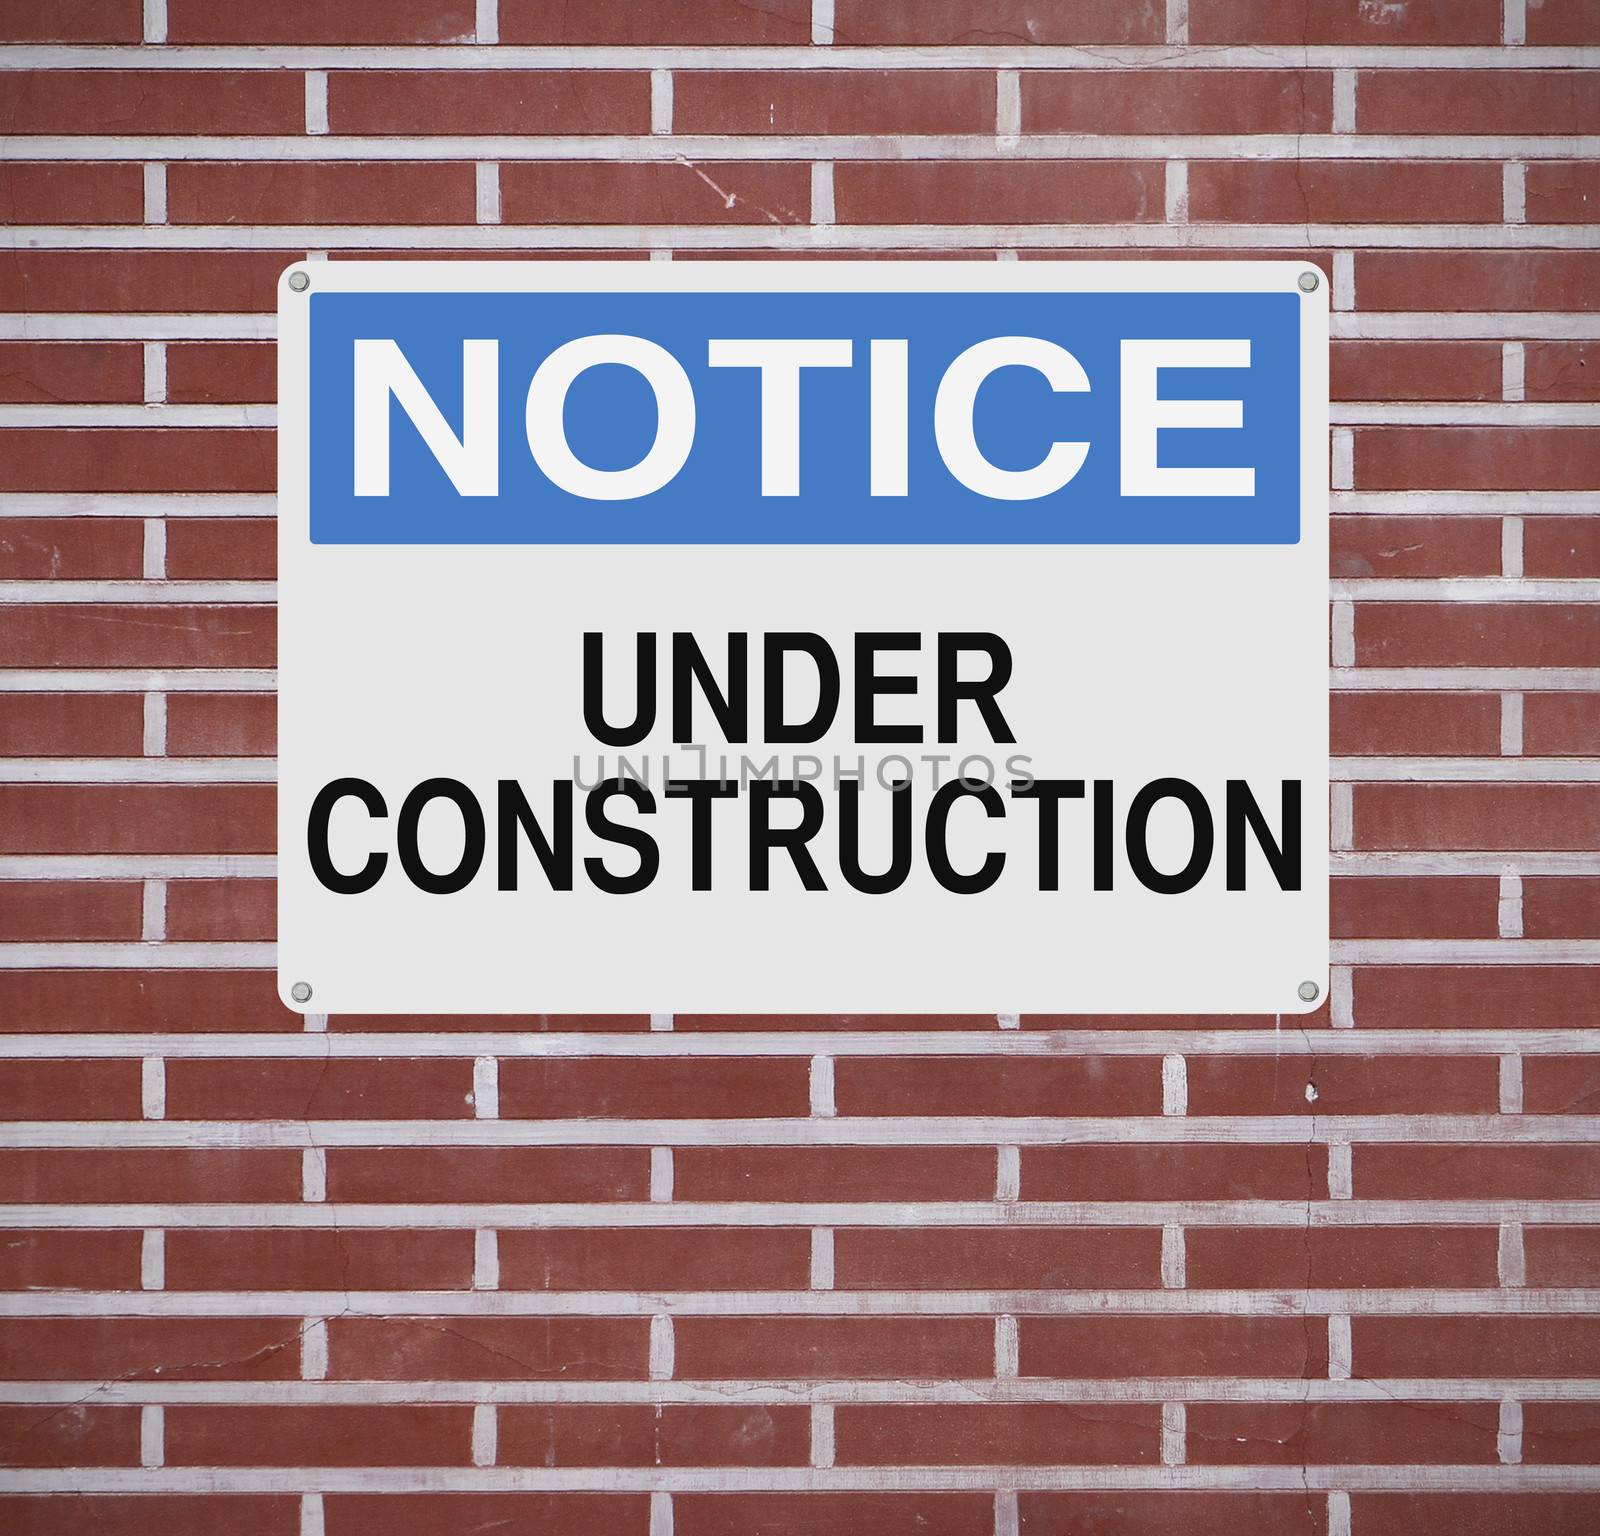 A notice sign indicating Under Construction